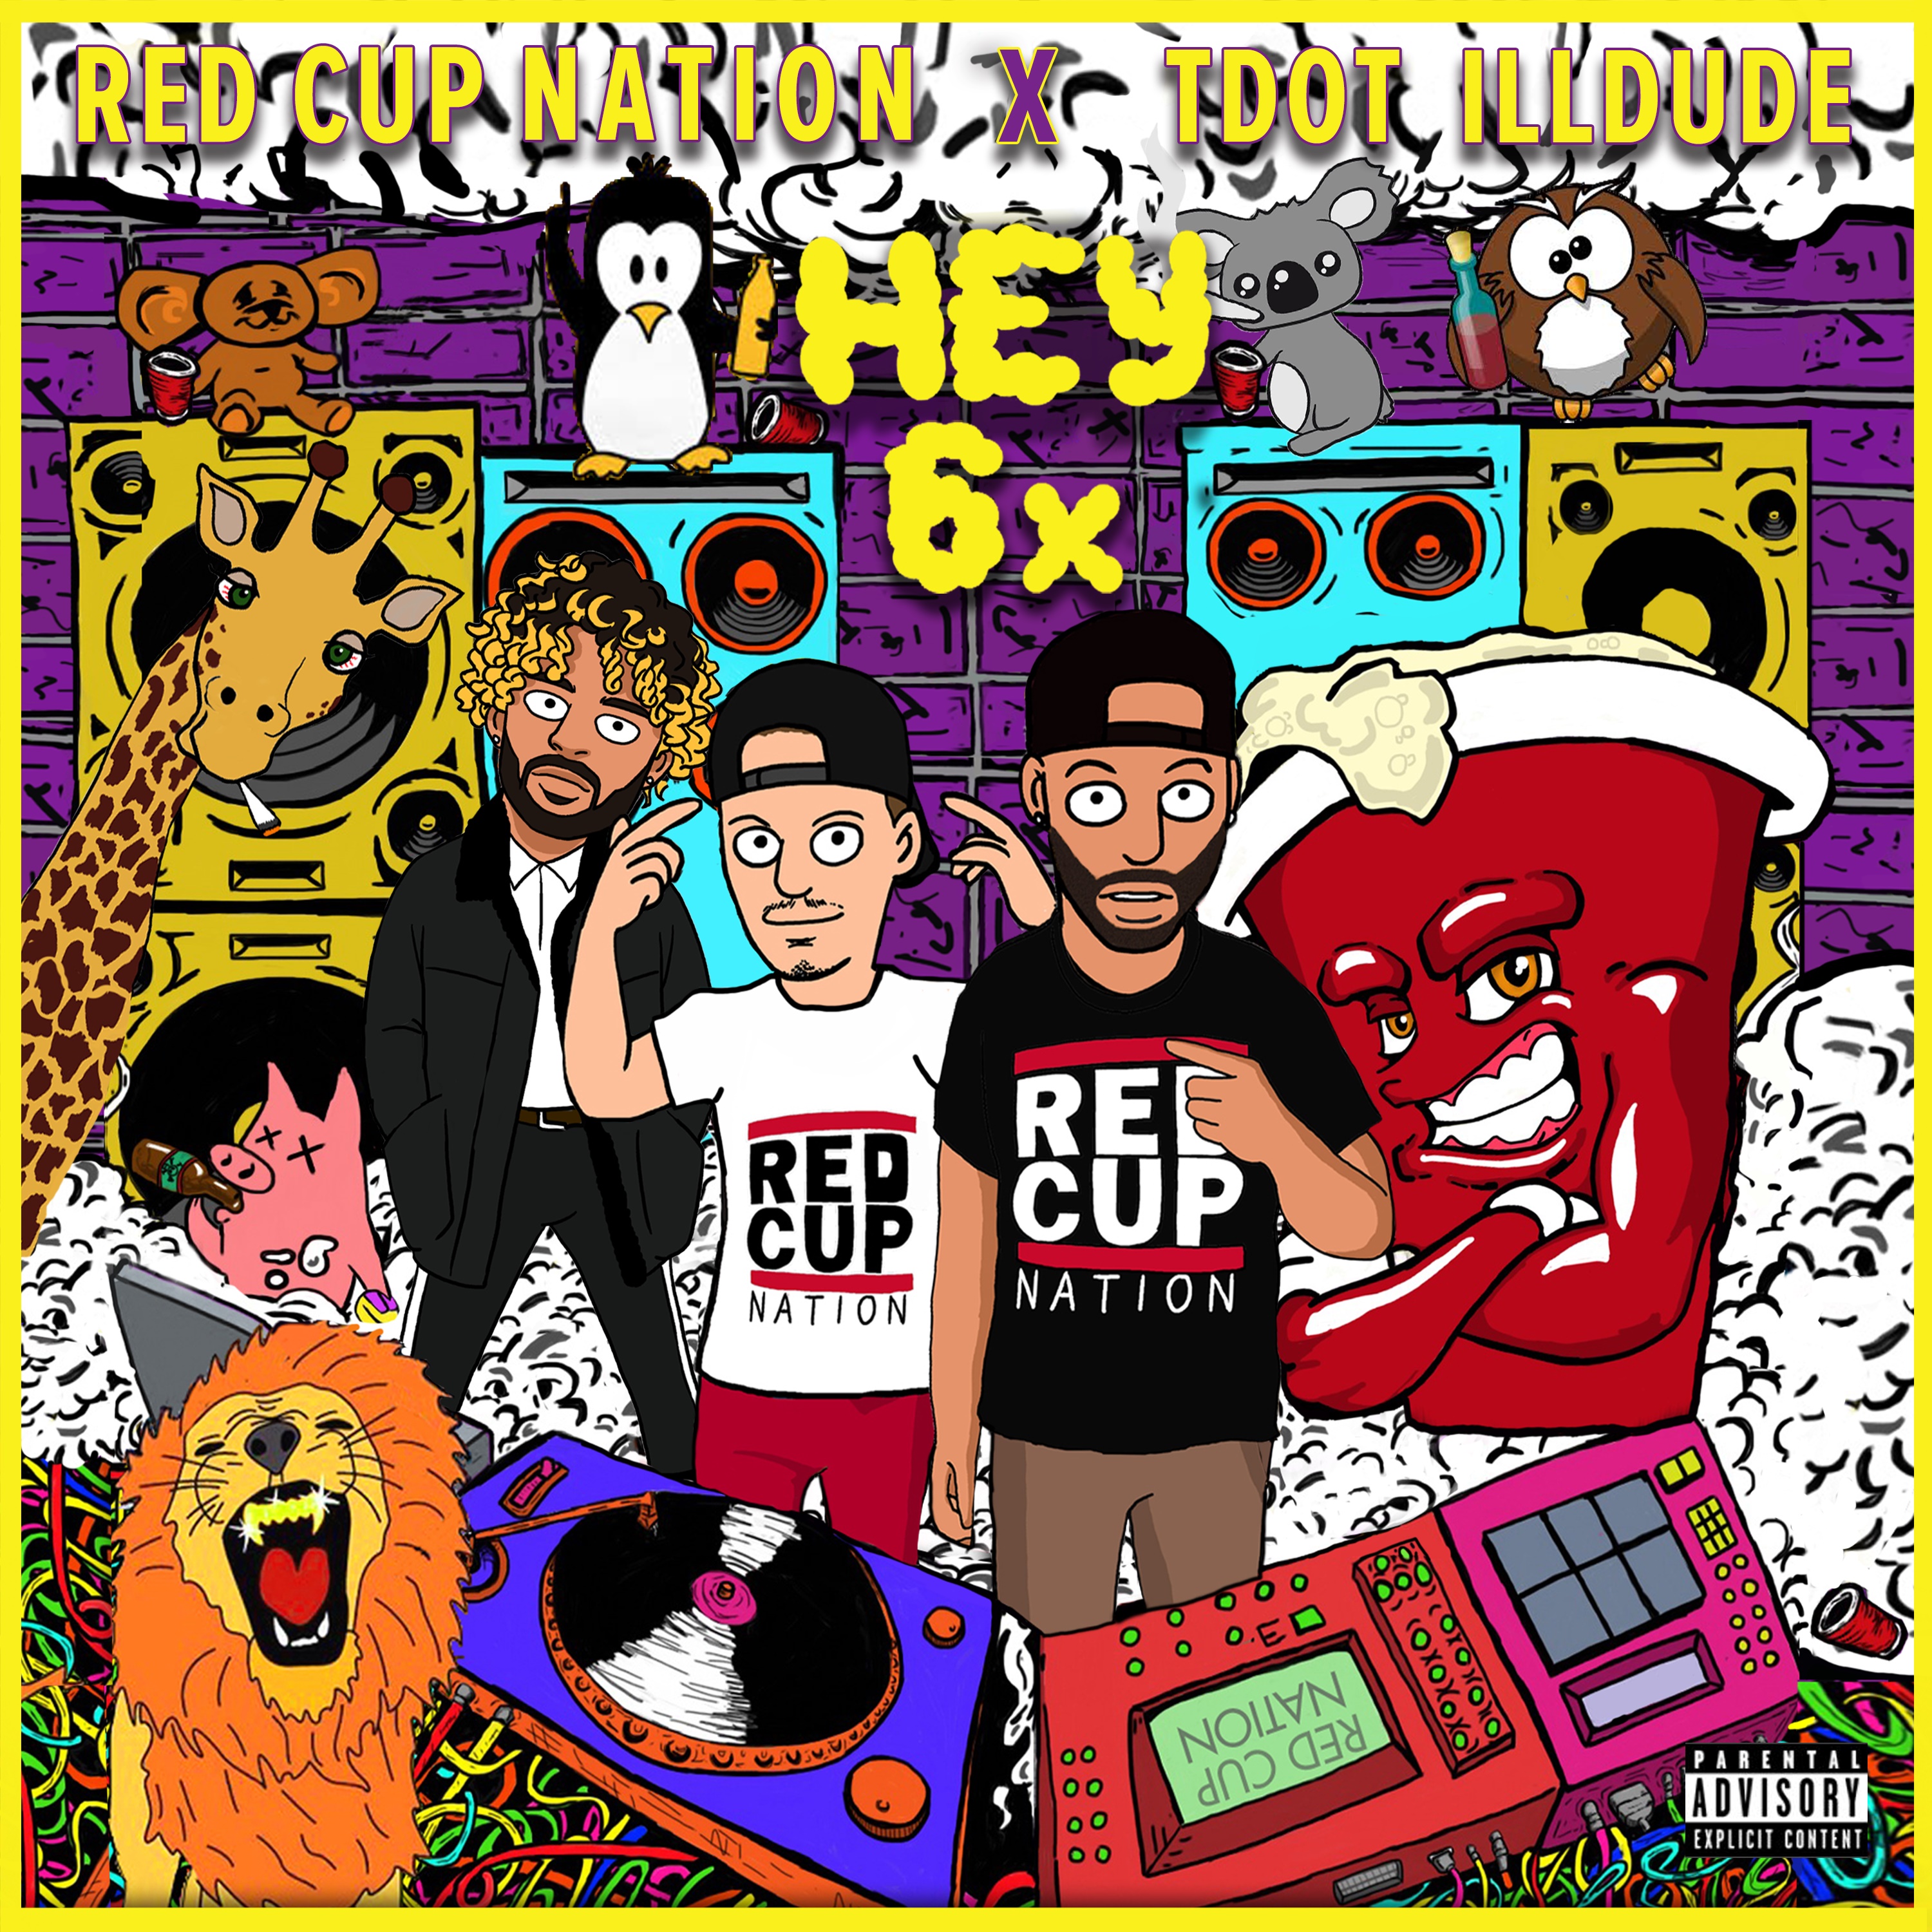 New Music: Red Cup Nation – “Hey 6X” Feat. Tdot Illdude [LISTEN]